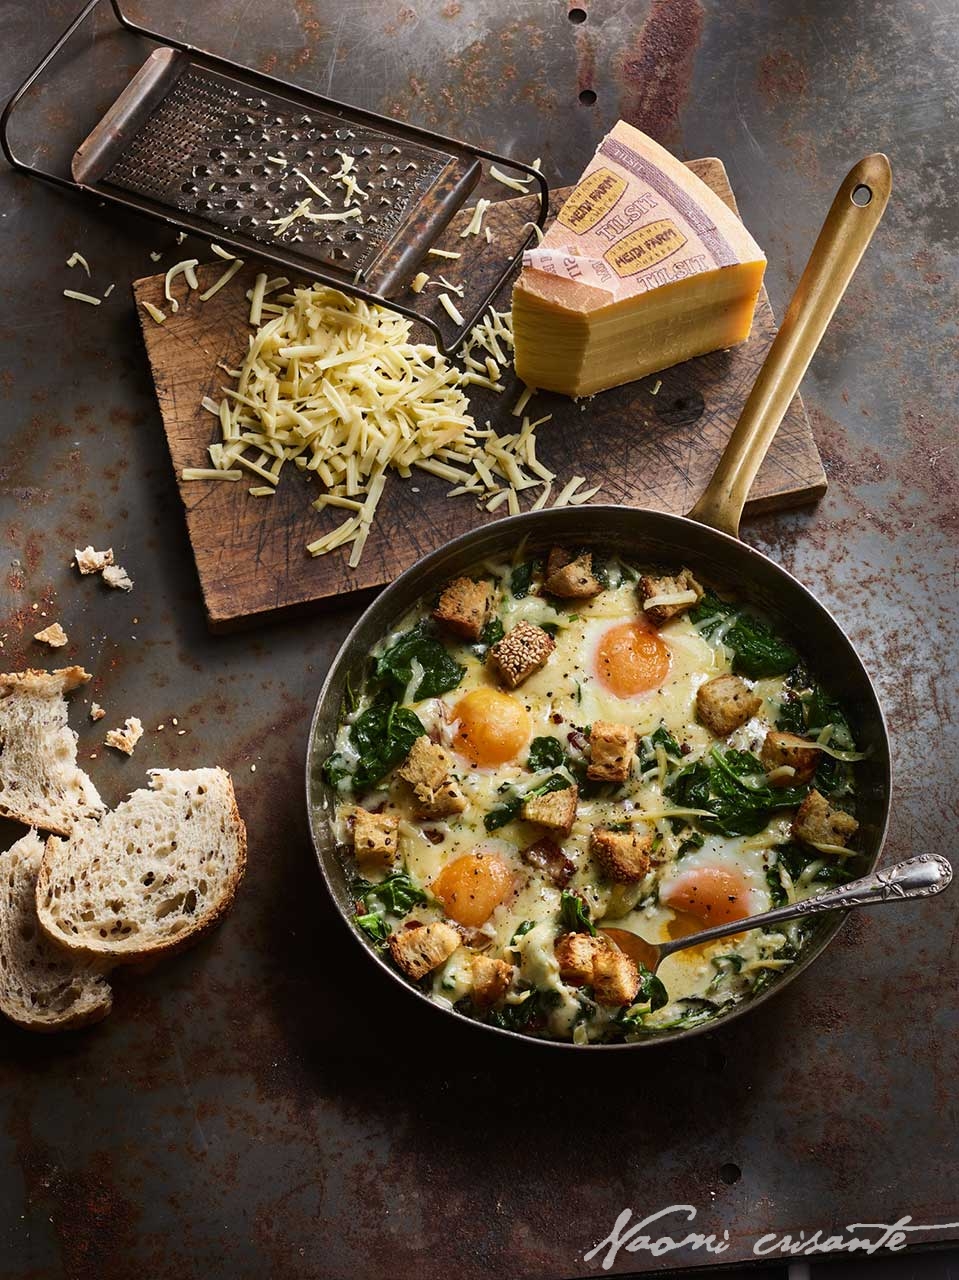 Spinach and Tilsit Baked Eggs with Croutons